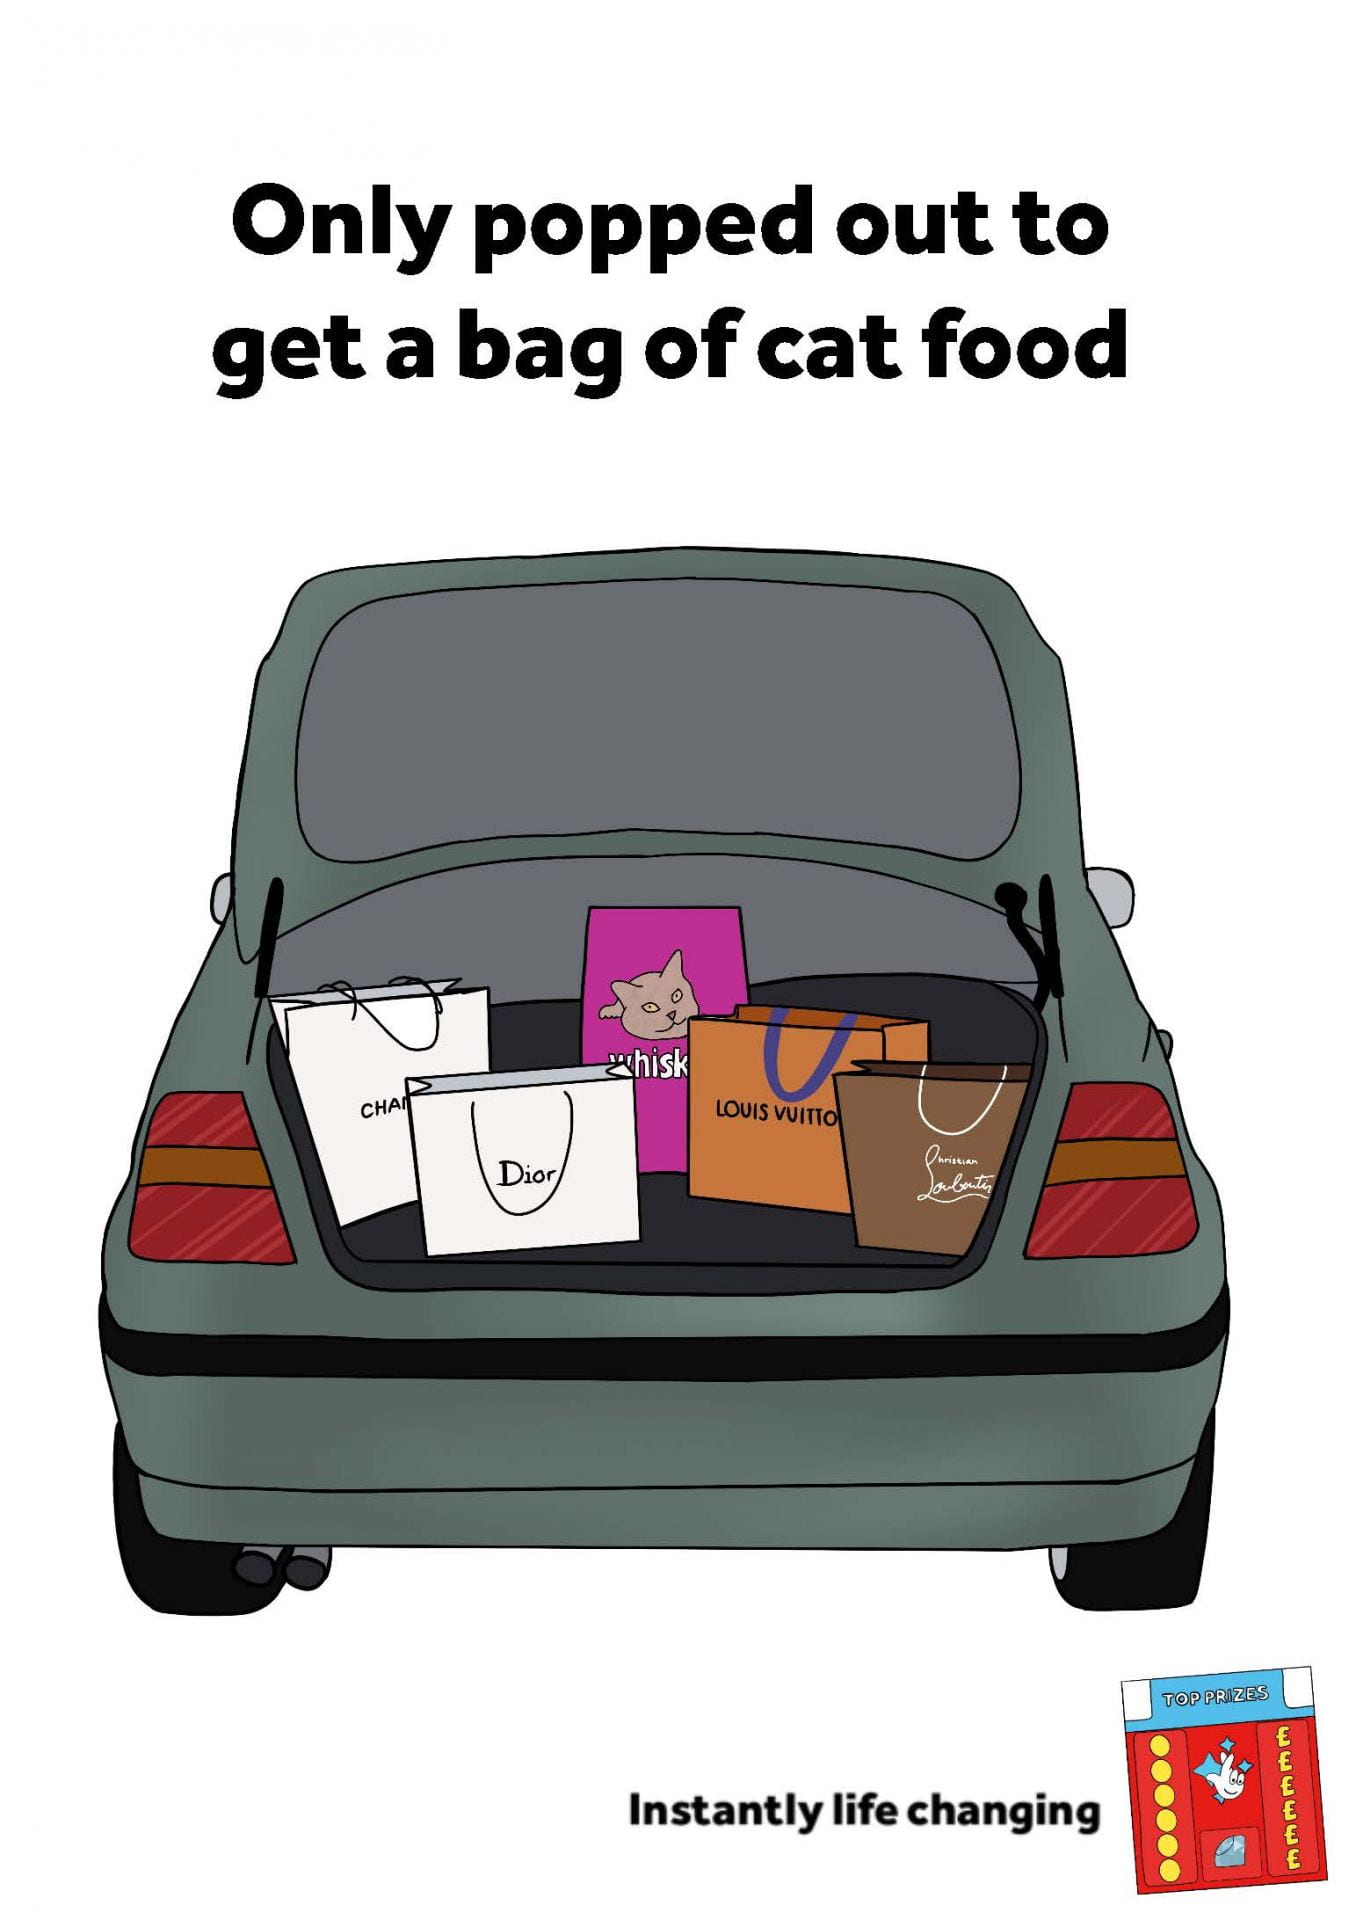 Illustration of car boot full of designer shopping bags and a bag of cat food with the tagline 'Only popped out to get a bag of cat food' (6-sheet).